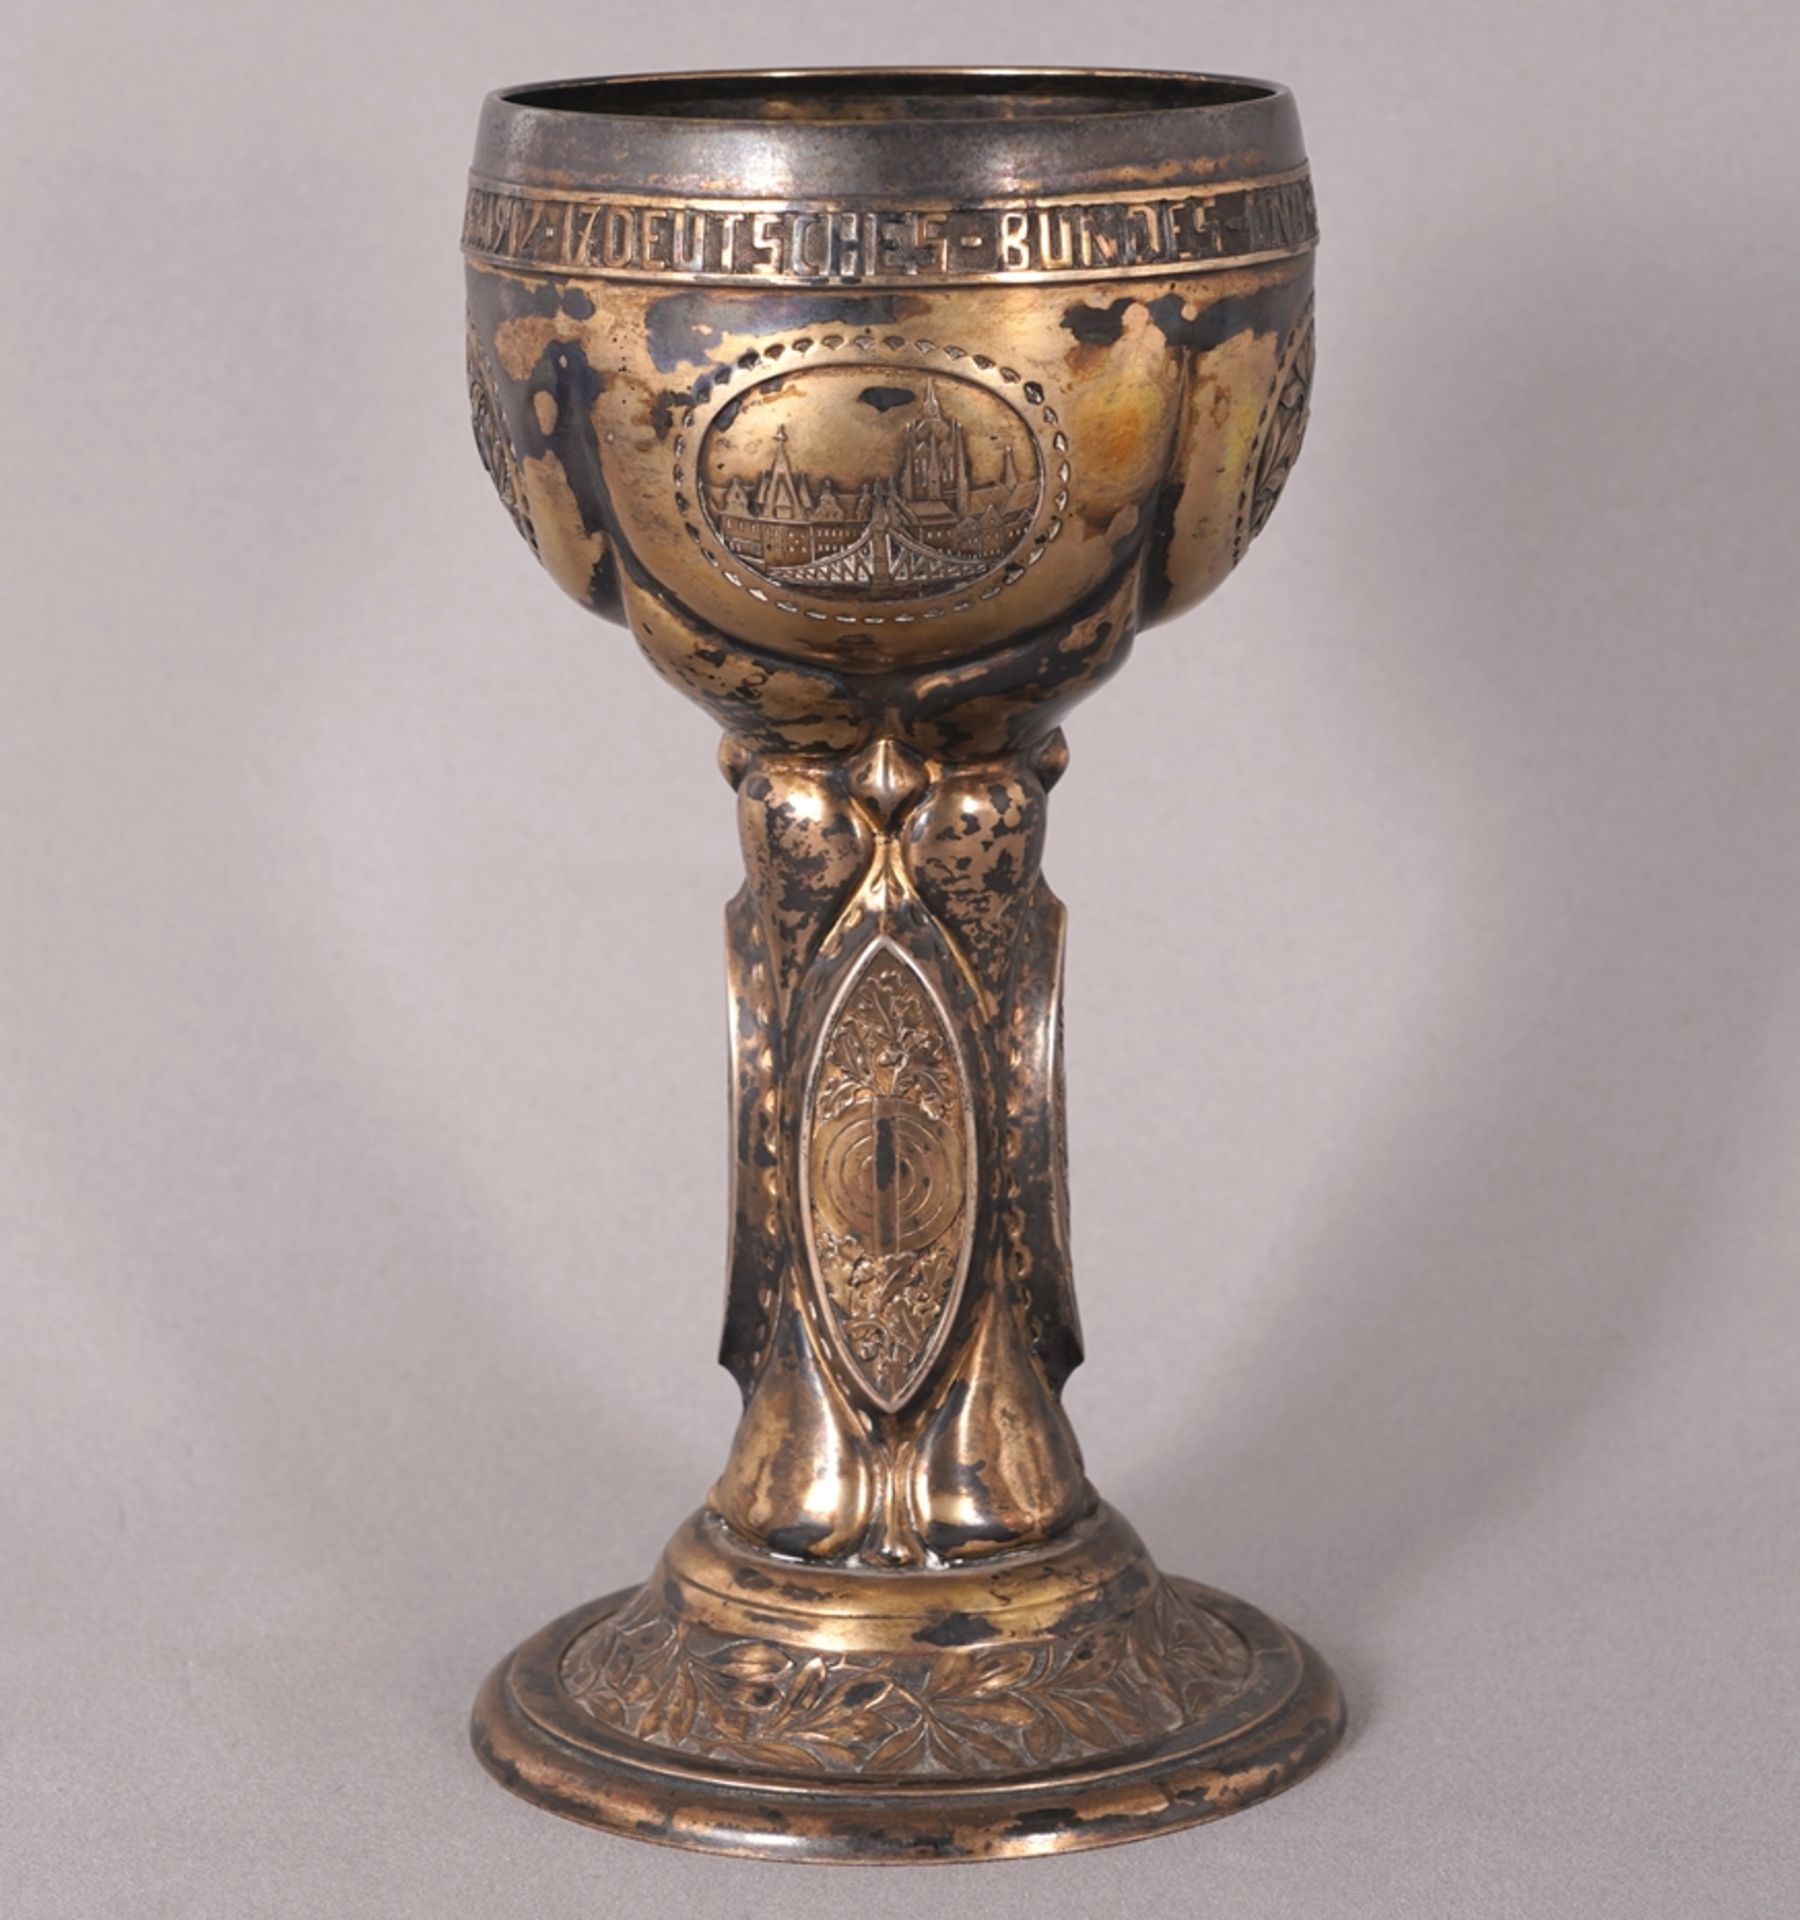 Rifleman's Cup - Image 2 of 7